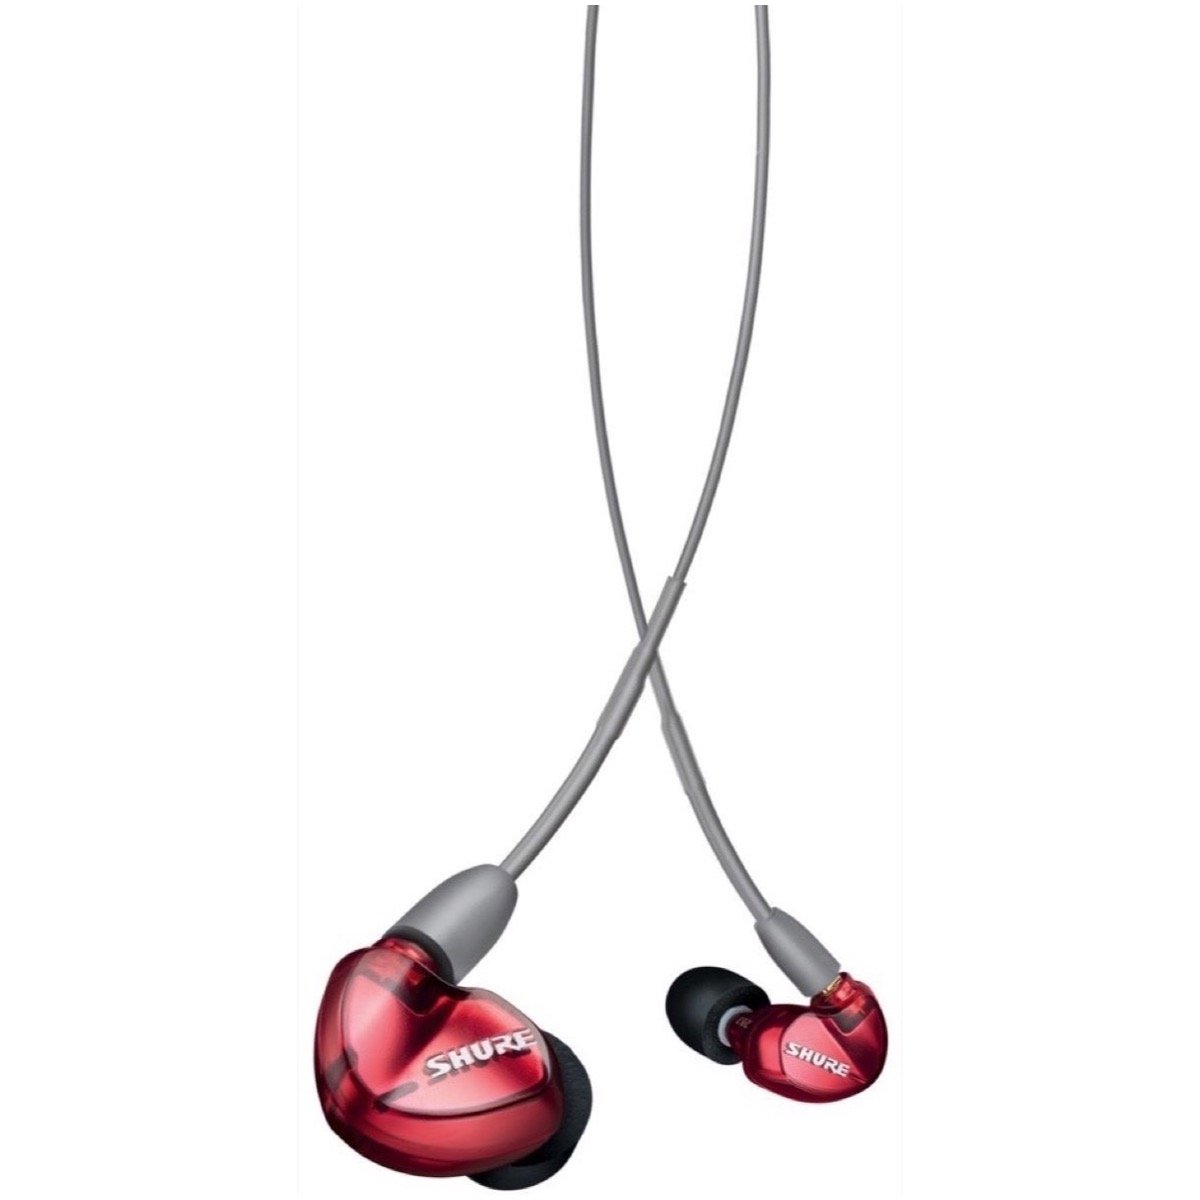 Shure SE535 Sound Isolating Earphones, Limited Edition Red